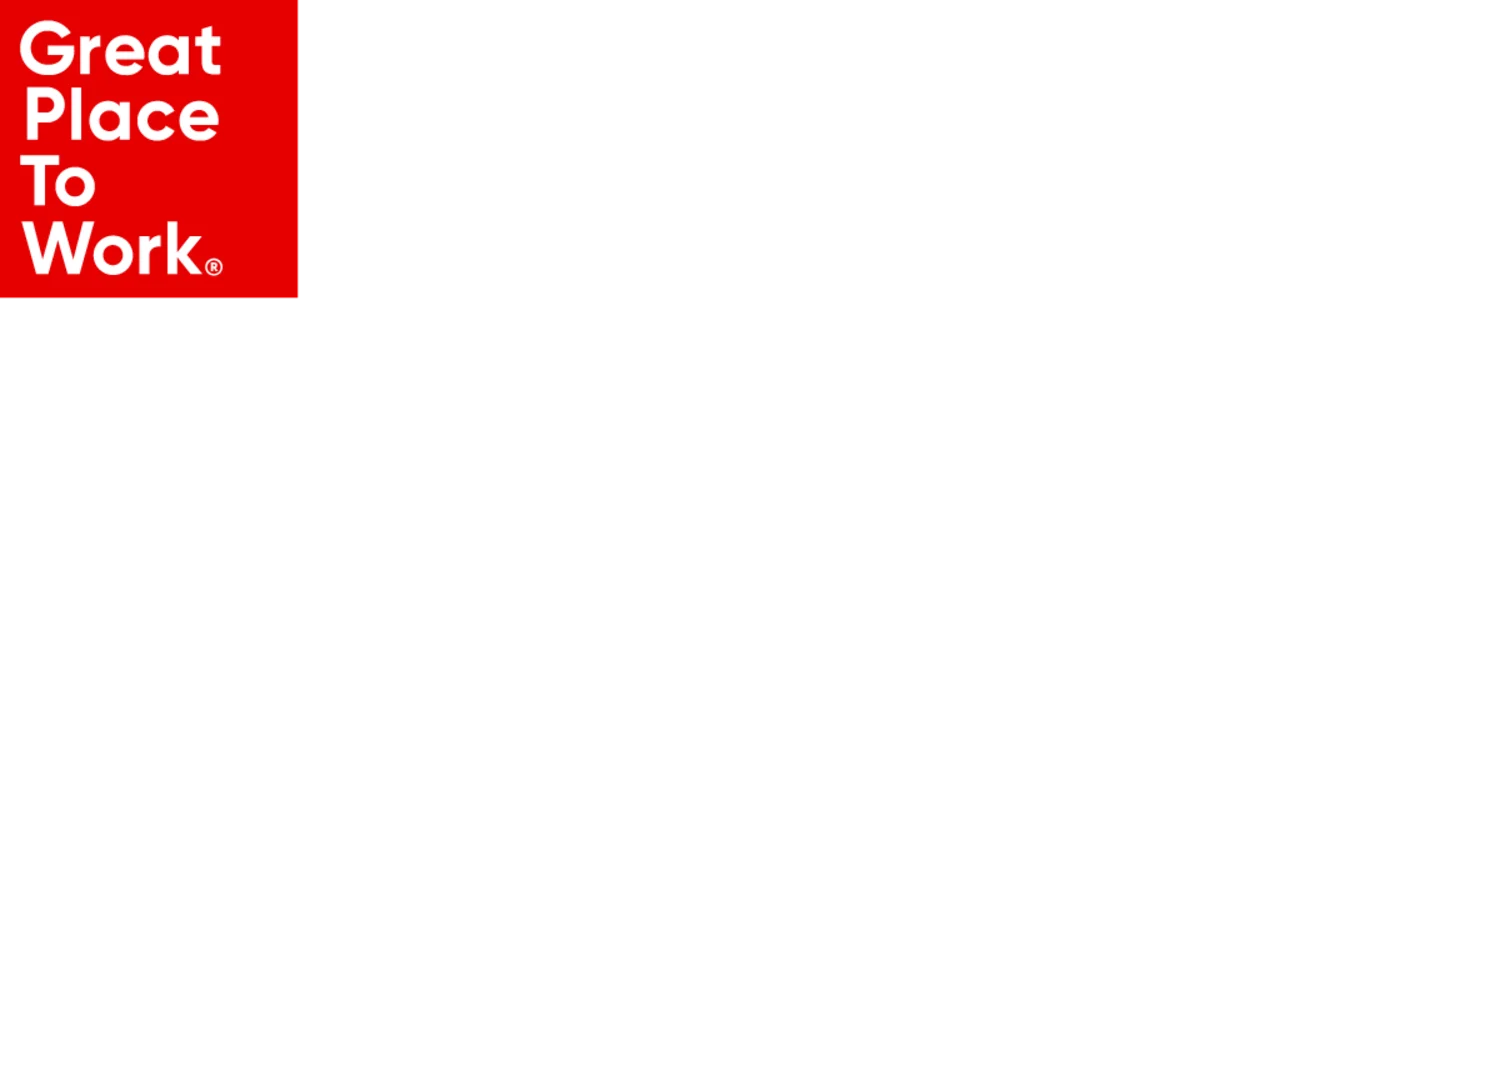 Revealed: The Best Places To Work Awards Canada 2022 winners